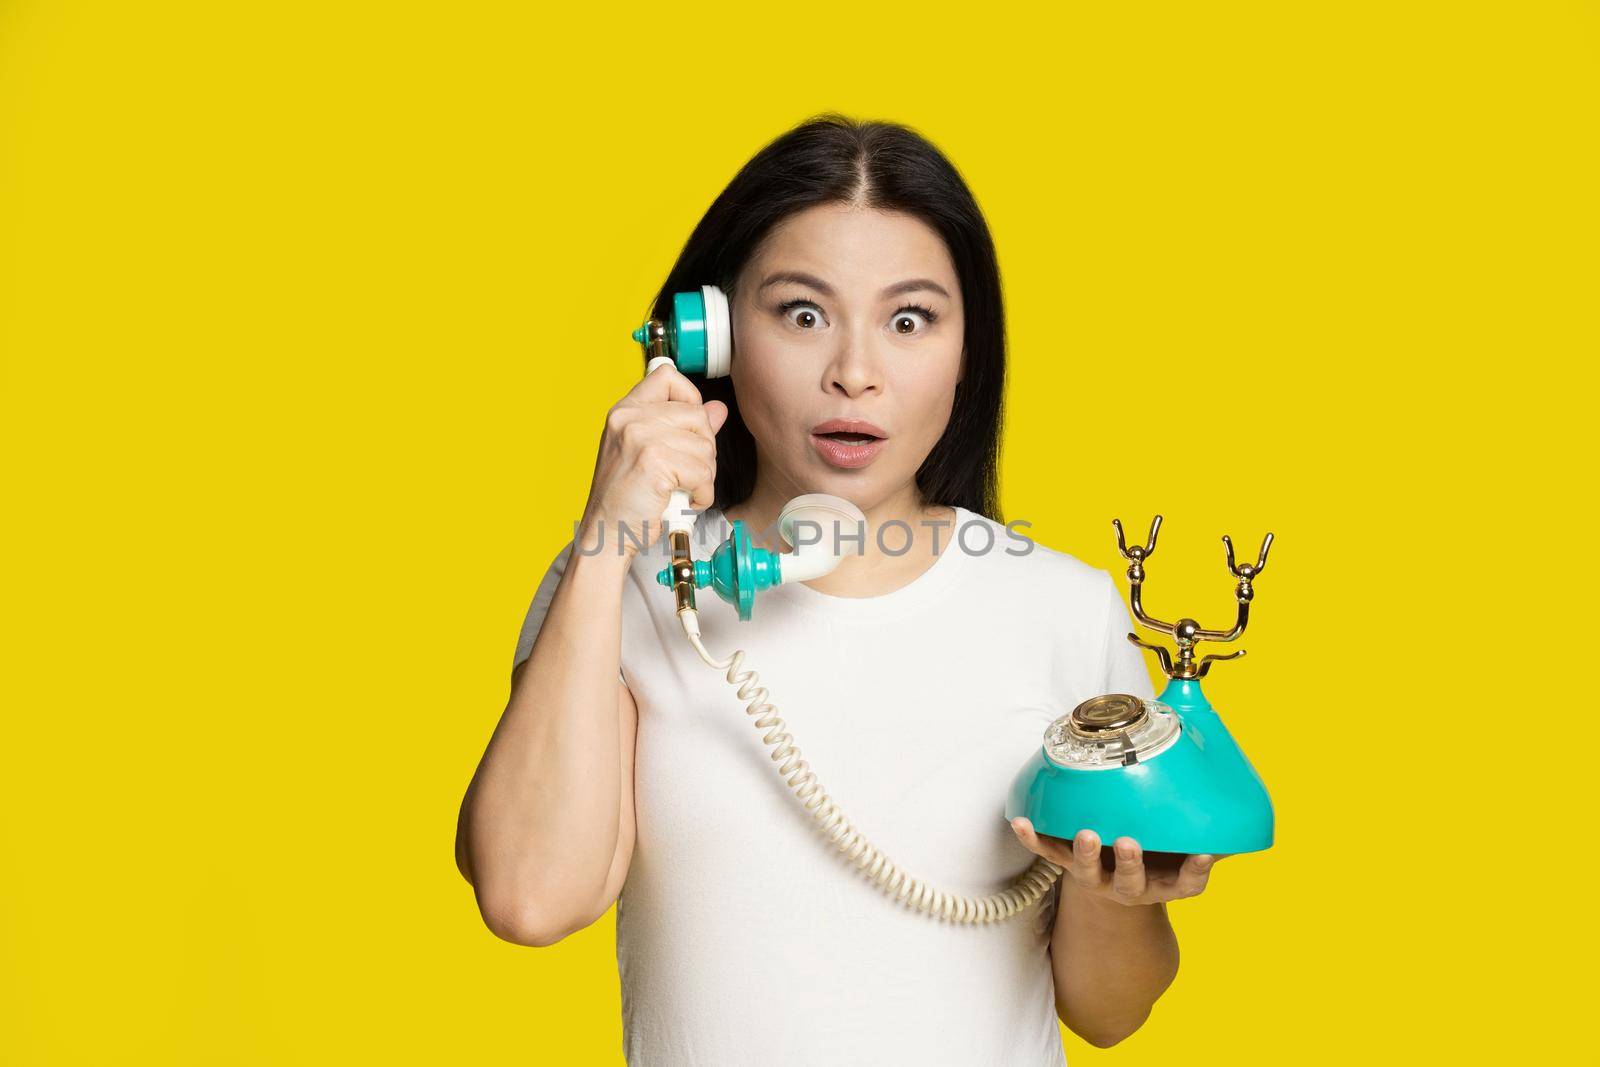 Shocked of winning lottery middle aged asian woman with vintage, retro telephone in hands excited, surprise face expression, isolated on yellow background. Communication concept by LipikStockMedia